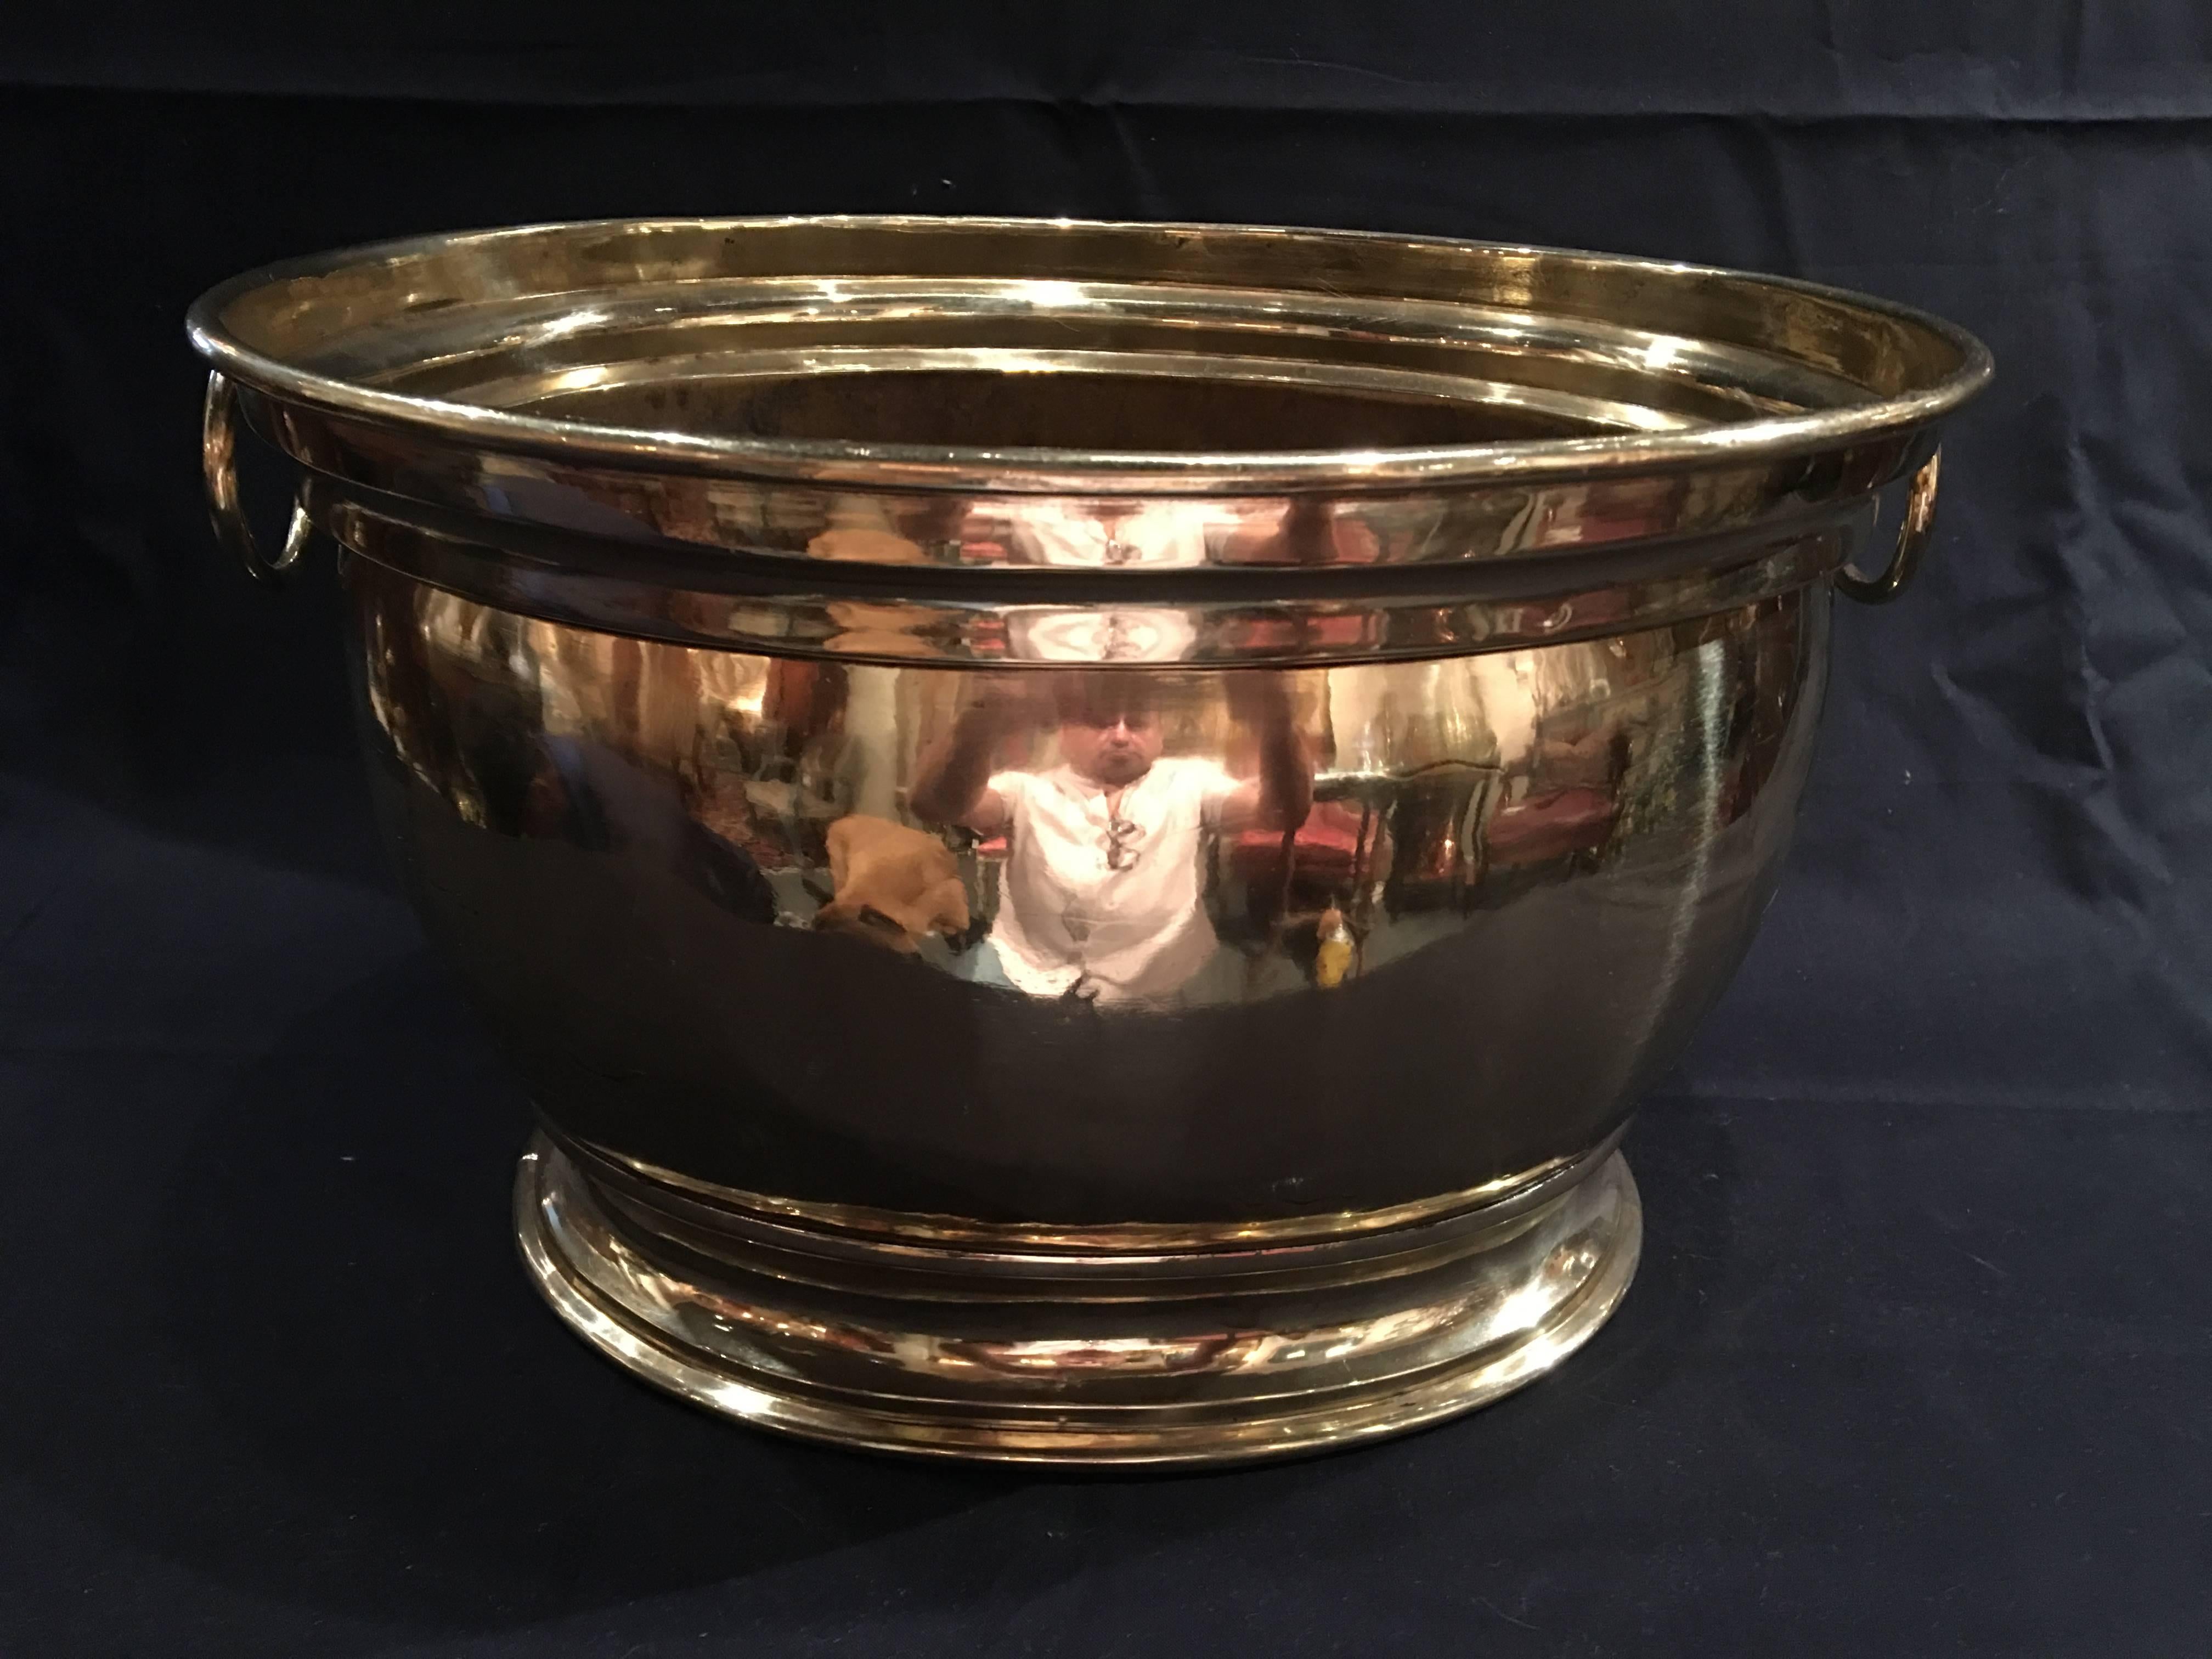 French polished brass jardiniere or planter with Handles, 19th century.